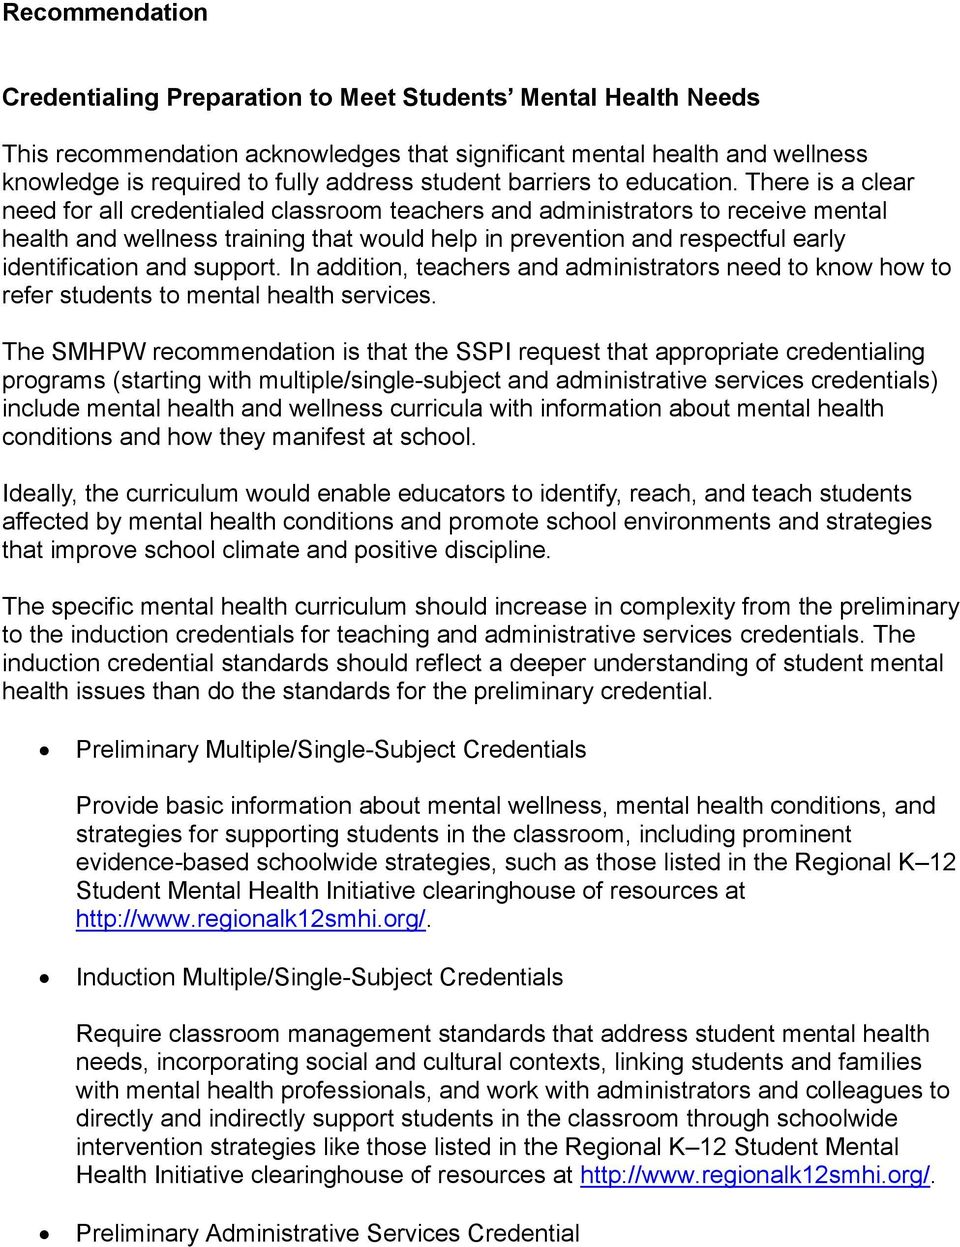 There is a clear need for all credentialed classroom teachers and administrators to receive mental health and wellness training that would help in prevention and respectful early identification and